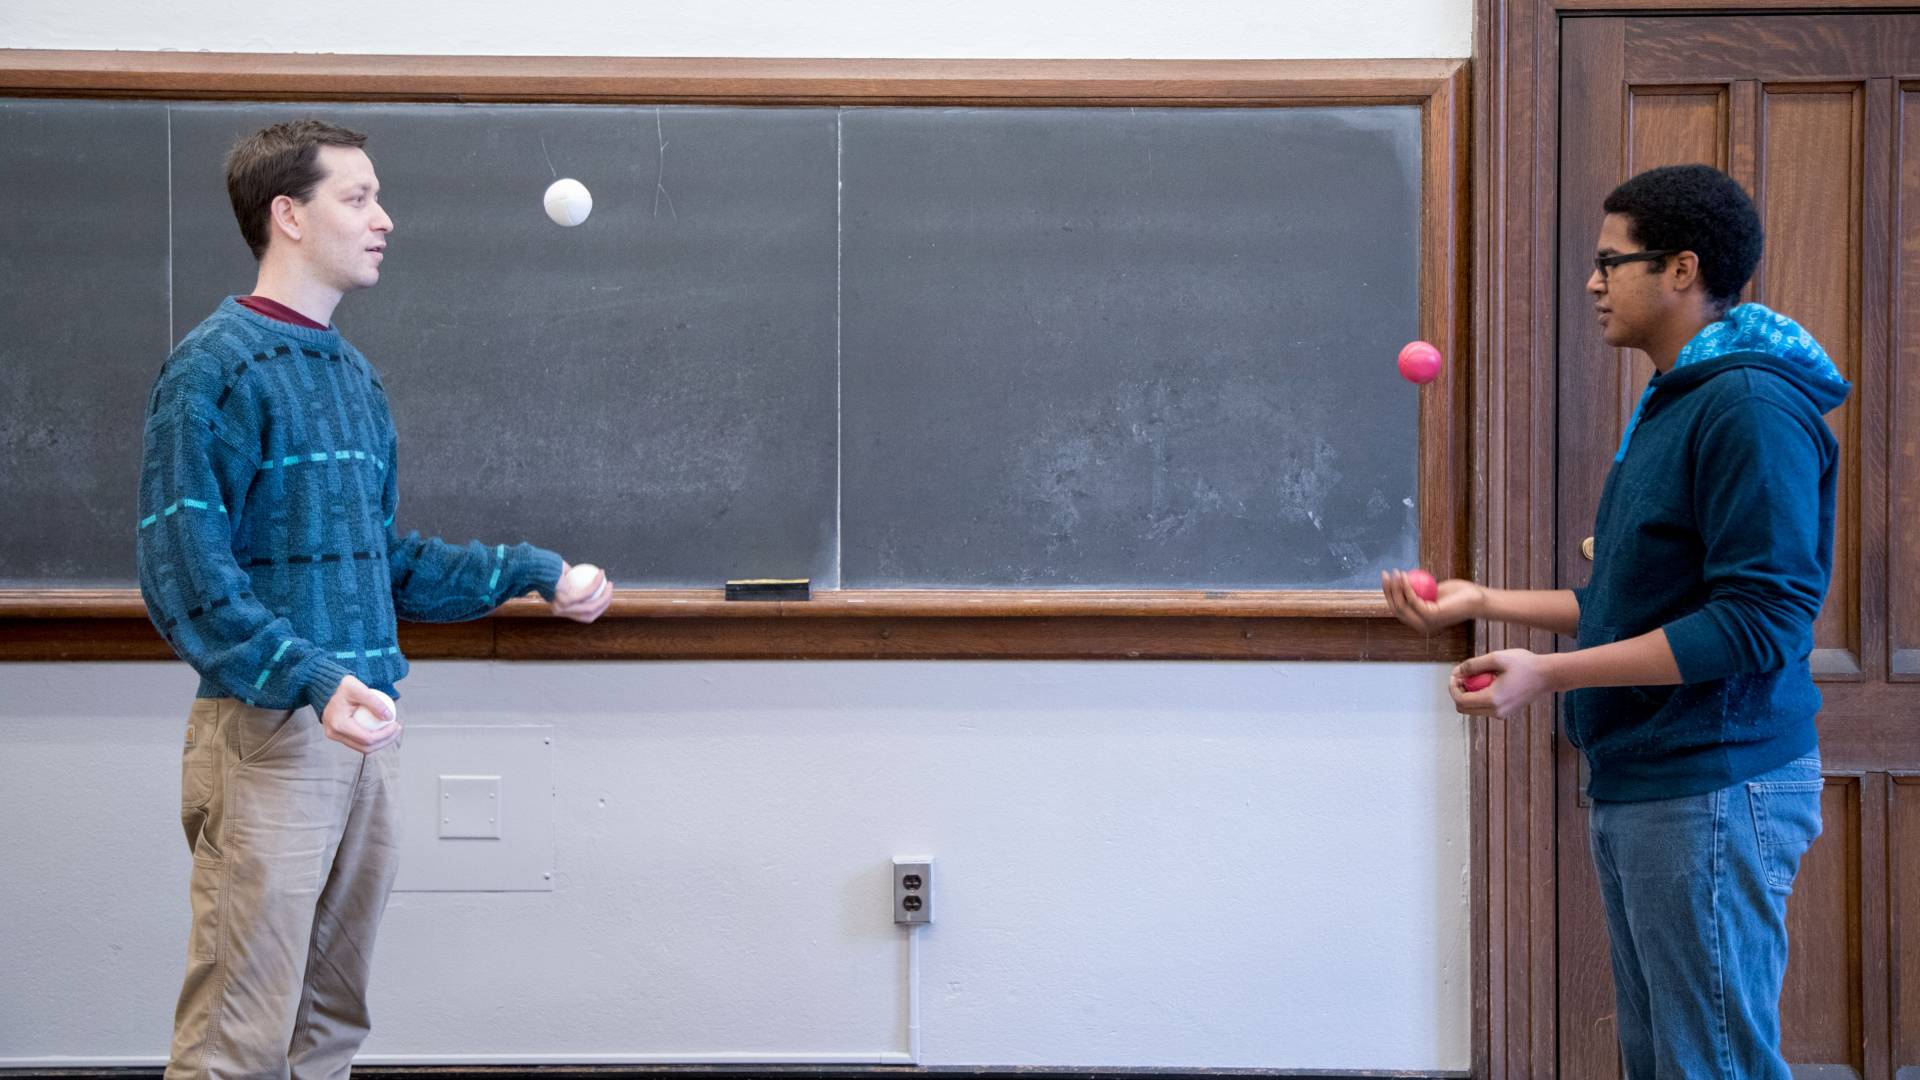 Students juggling in classroom